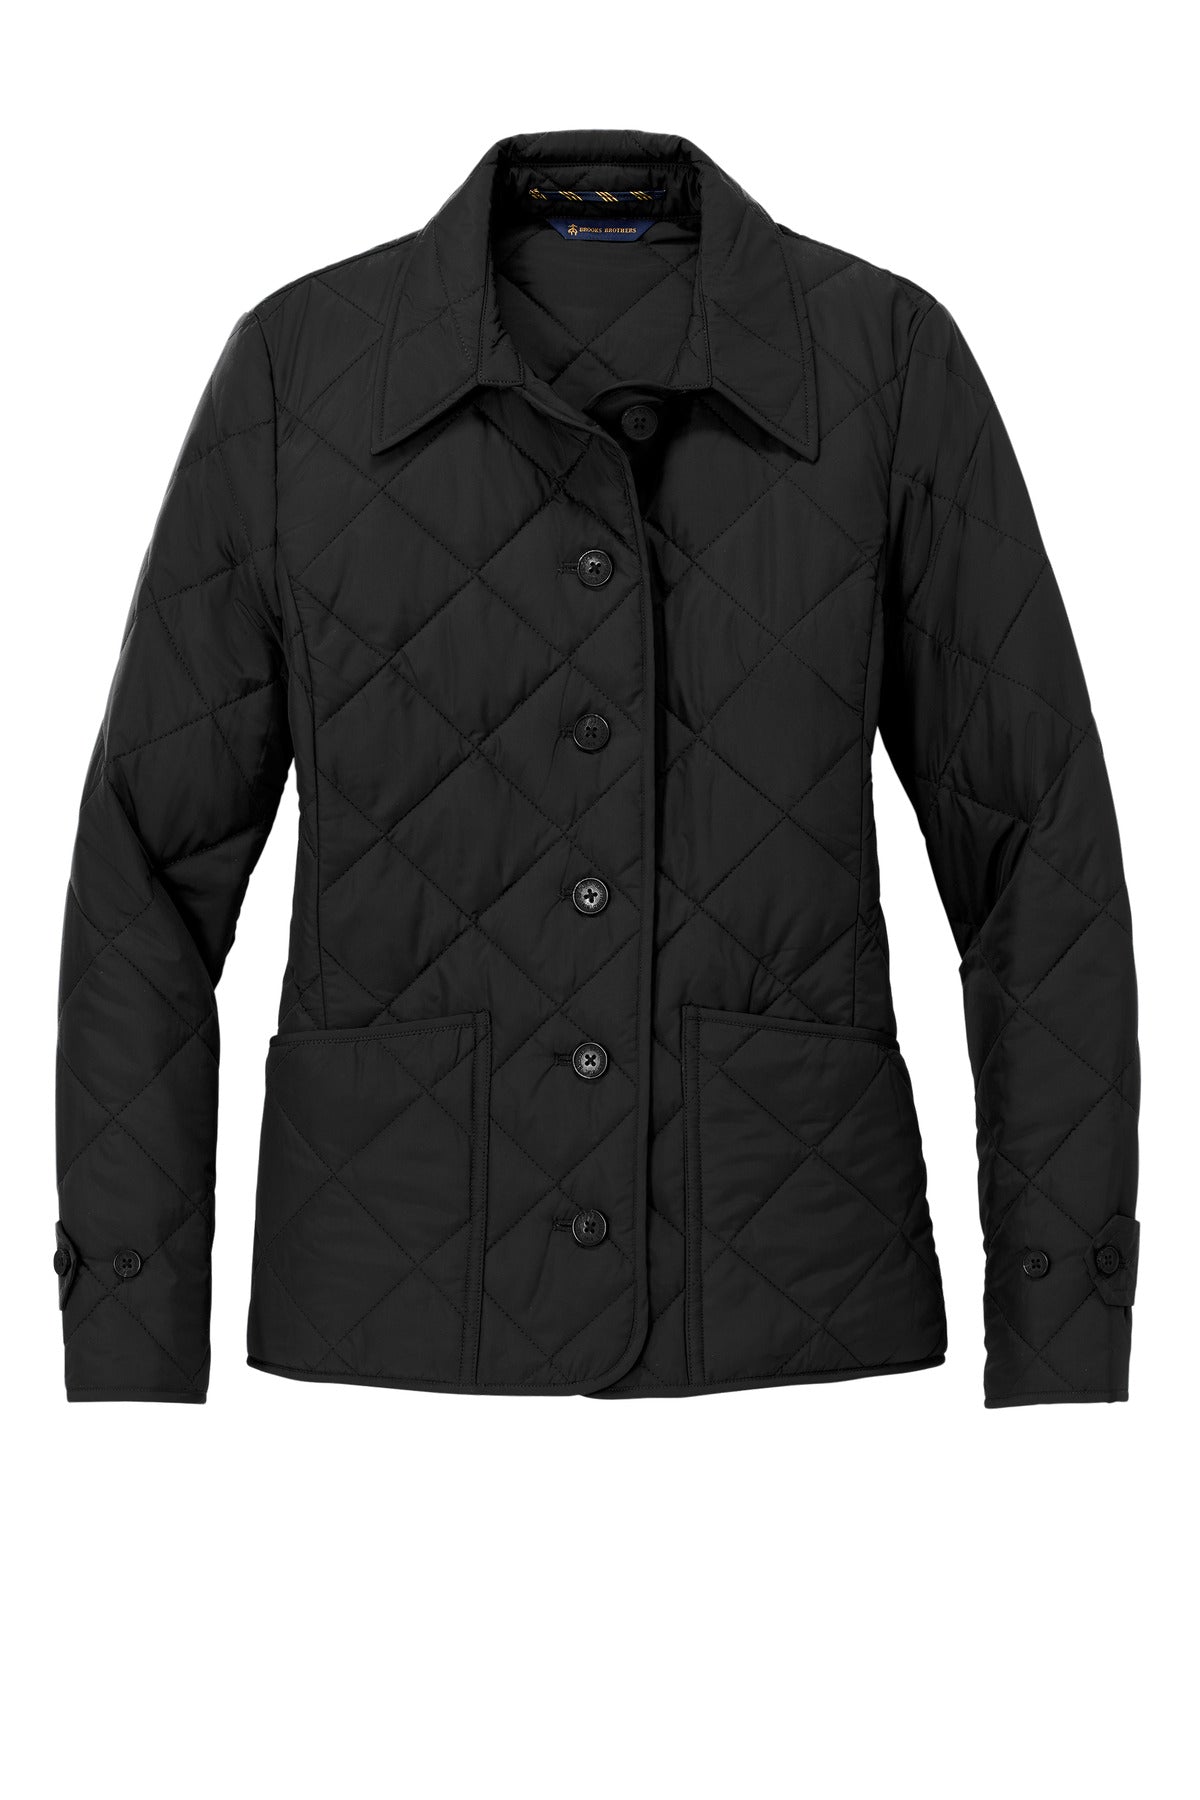 Brooks Brothers® Women's Quilted Jacket BB18601